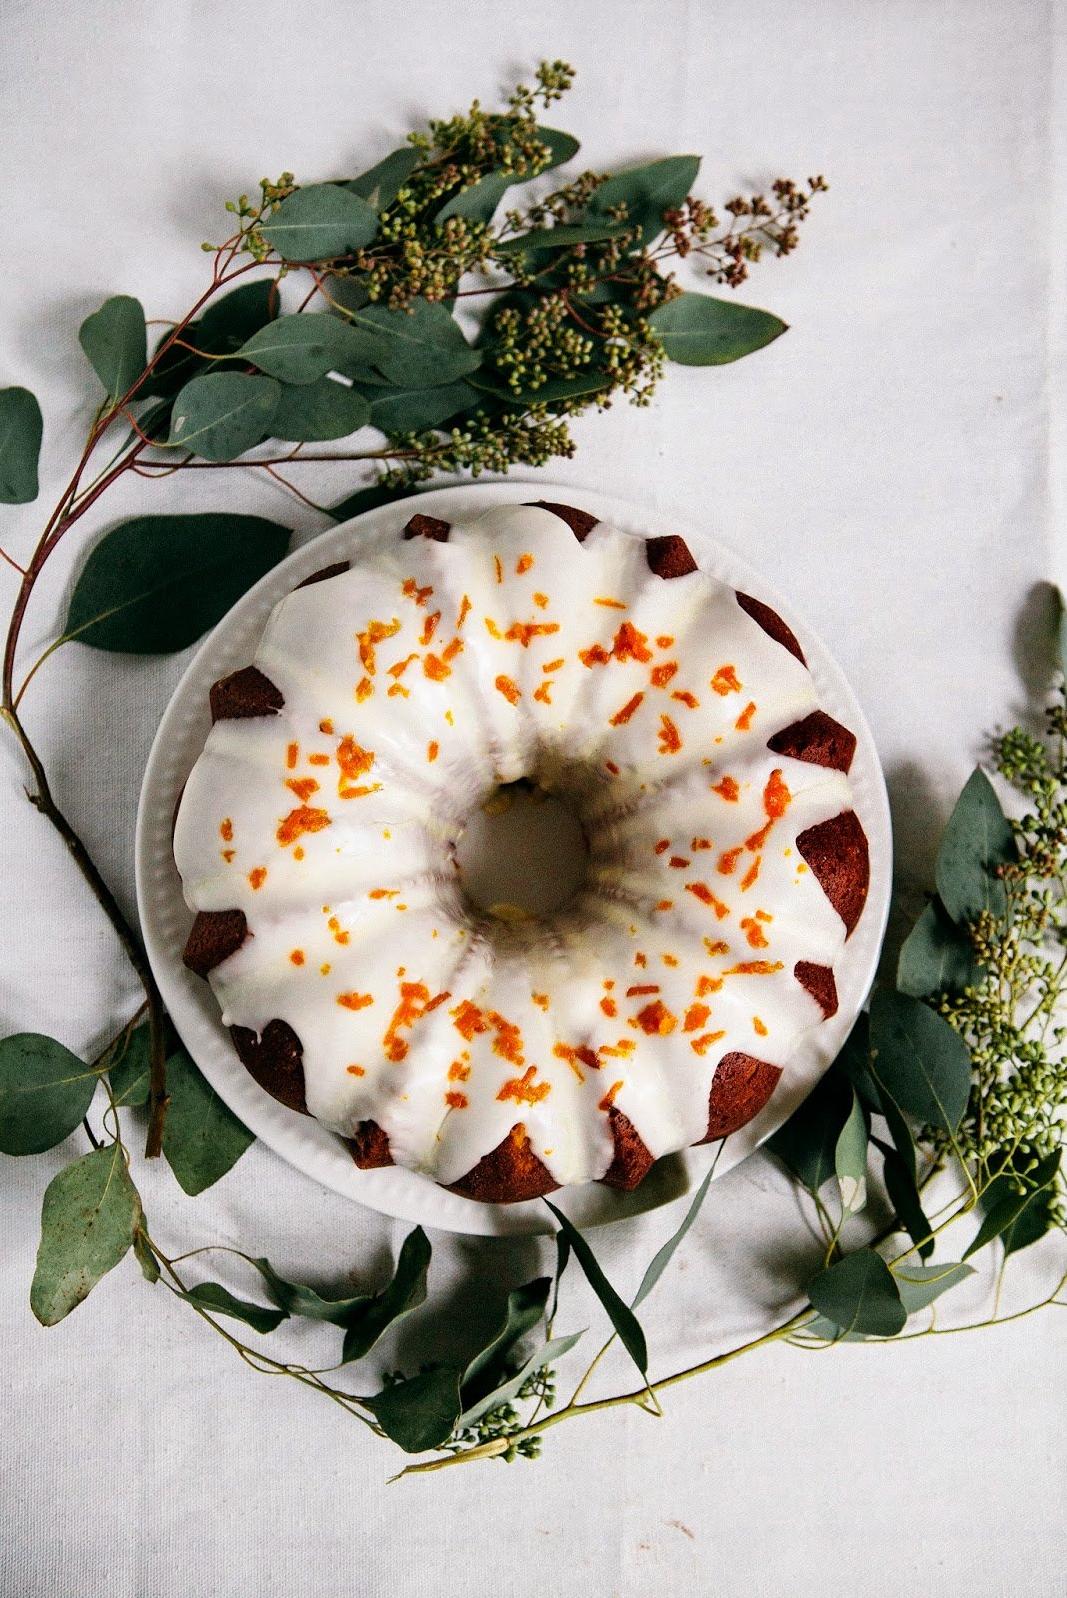  Tangy Tangerine Sour Cream Pound Cake is a perfect citrus-infused treat!